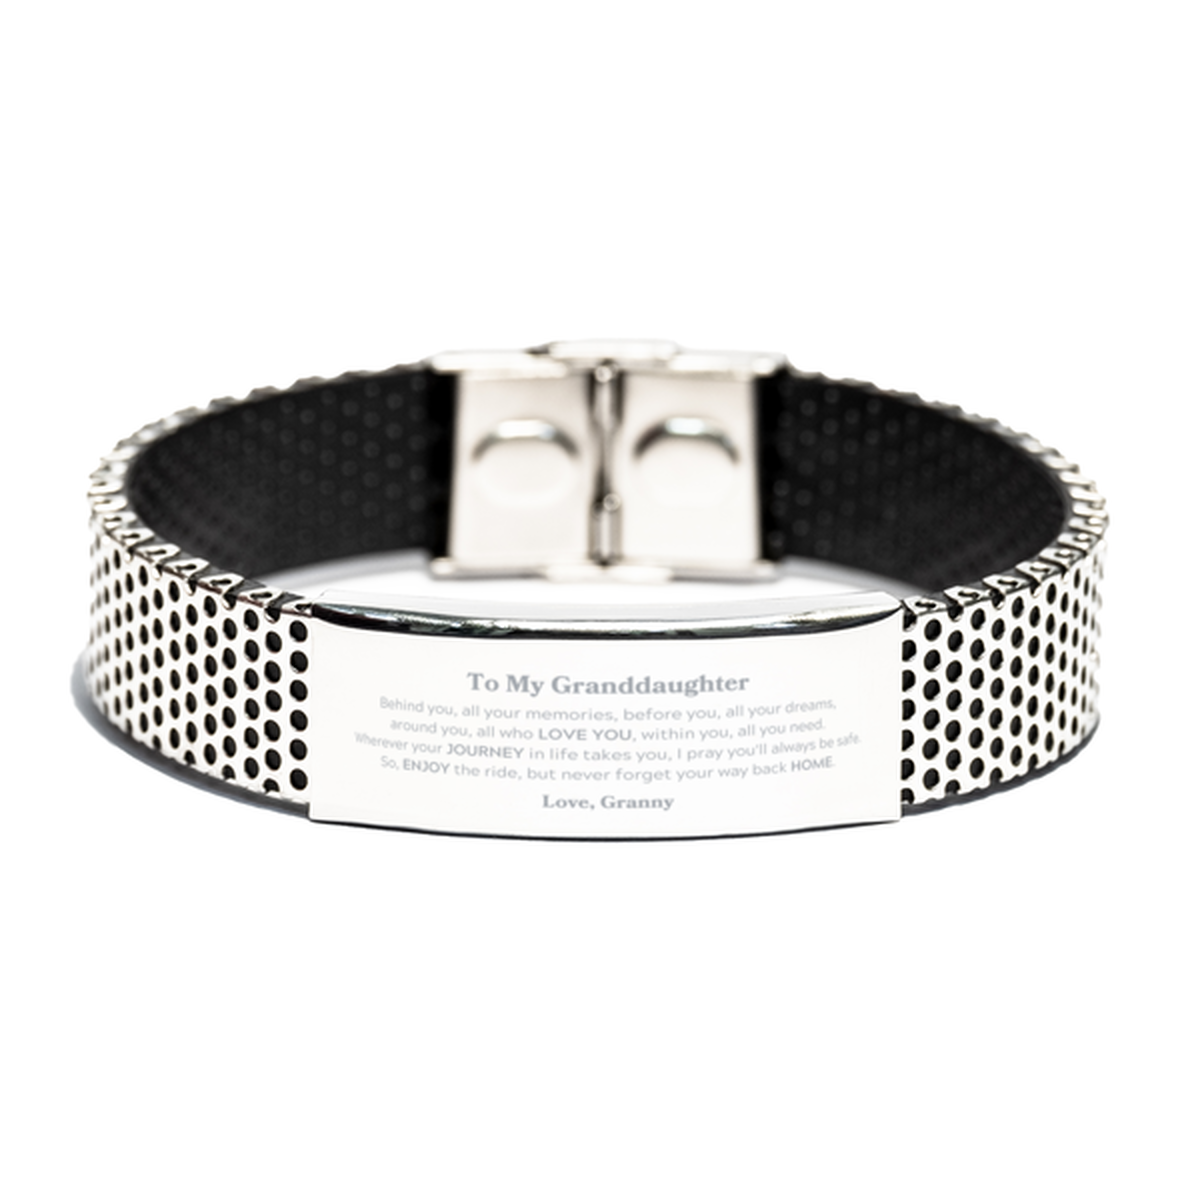 To My Granddaughter Graduation Gifts from Granny, Granddaughter Stainless Steel Bracelet Christmas Birthday Gifts for Granddaughter Behind you, all your memories, before you, all your dreams. Love, Granny